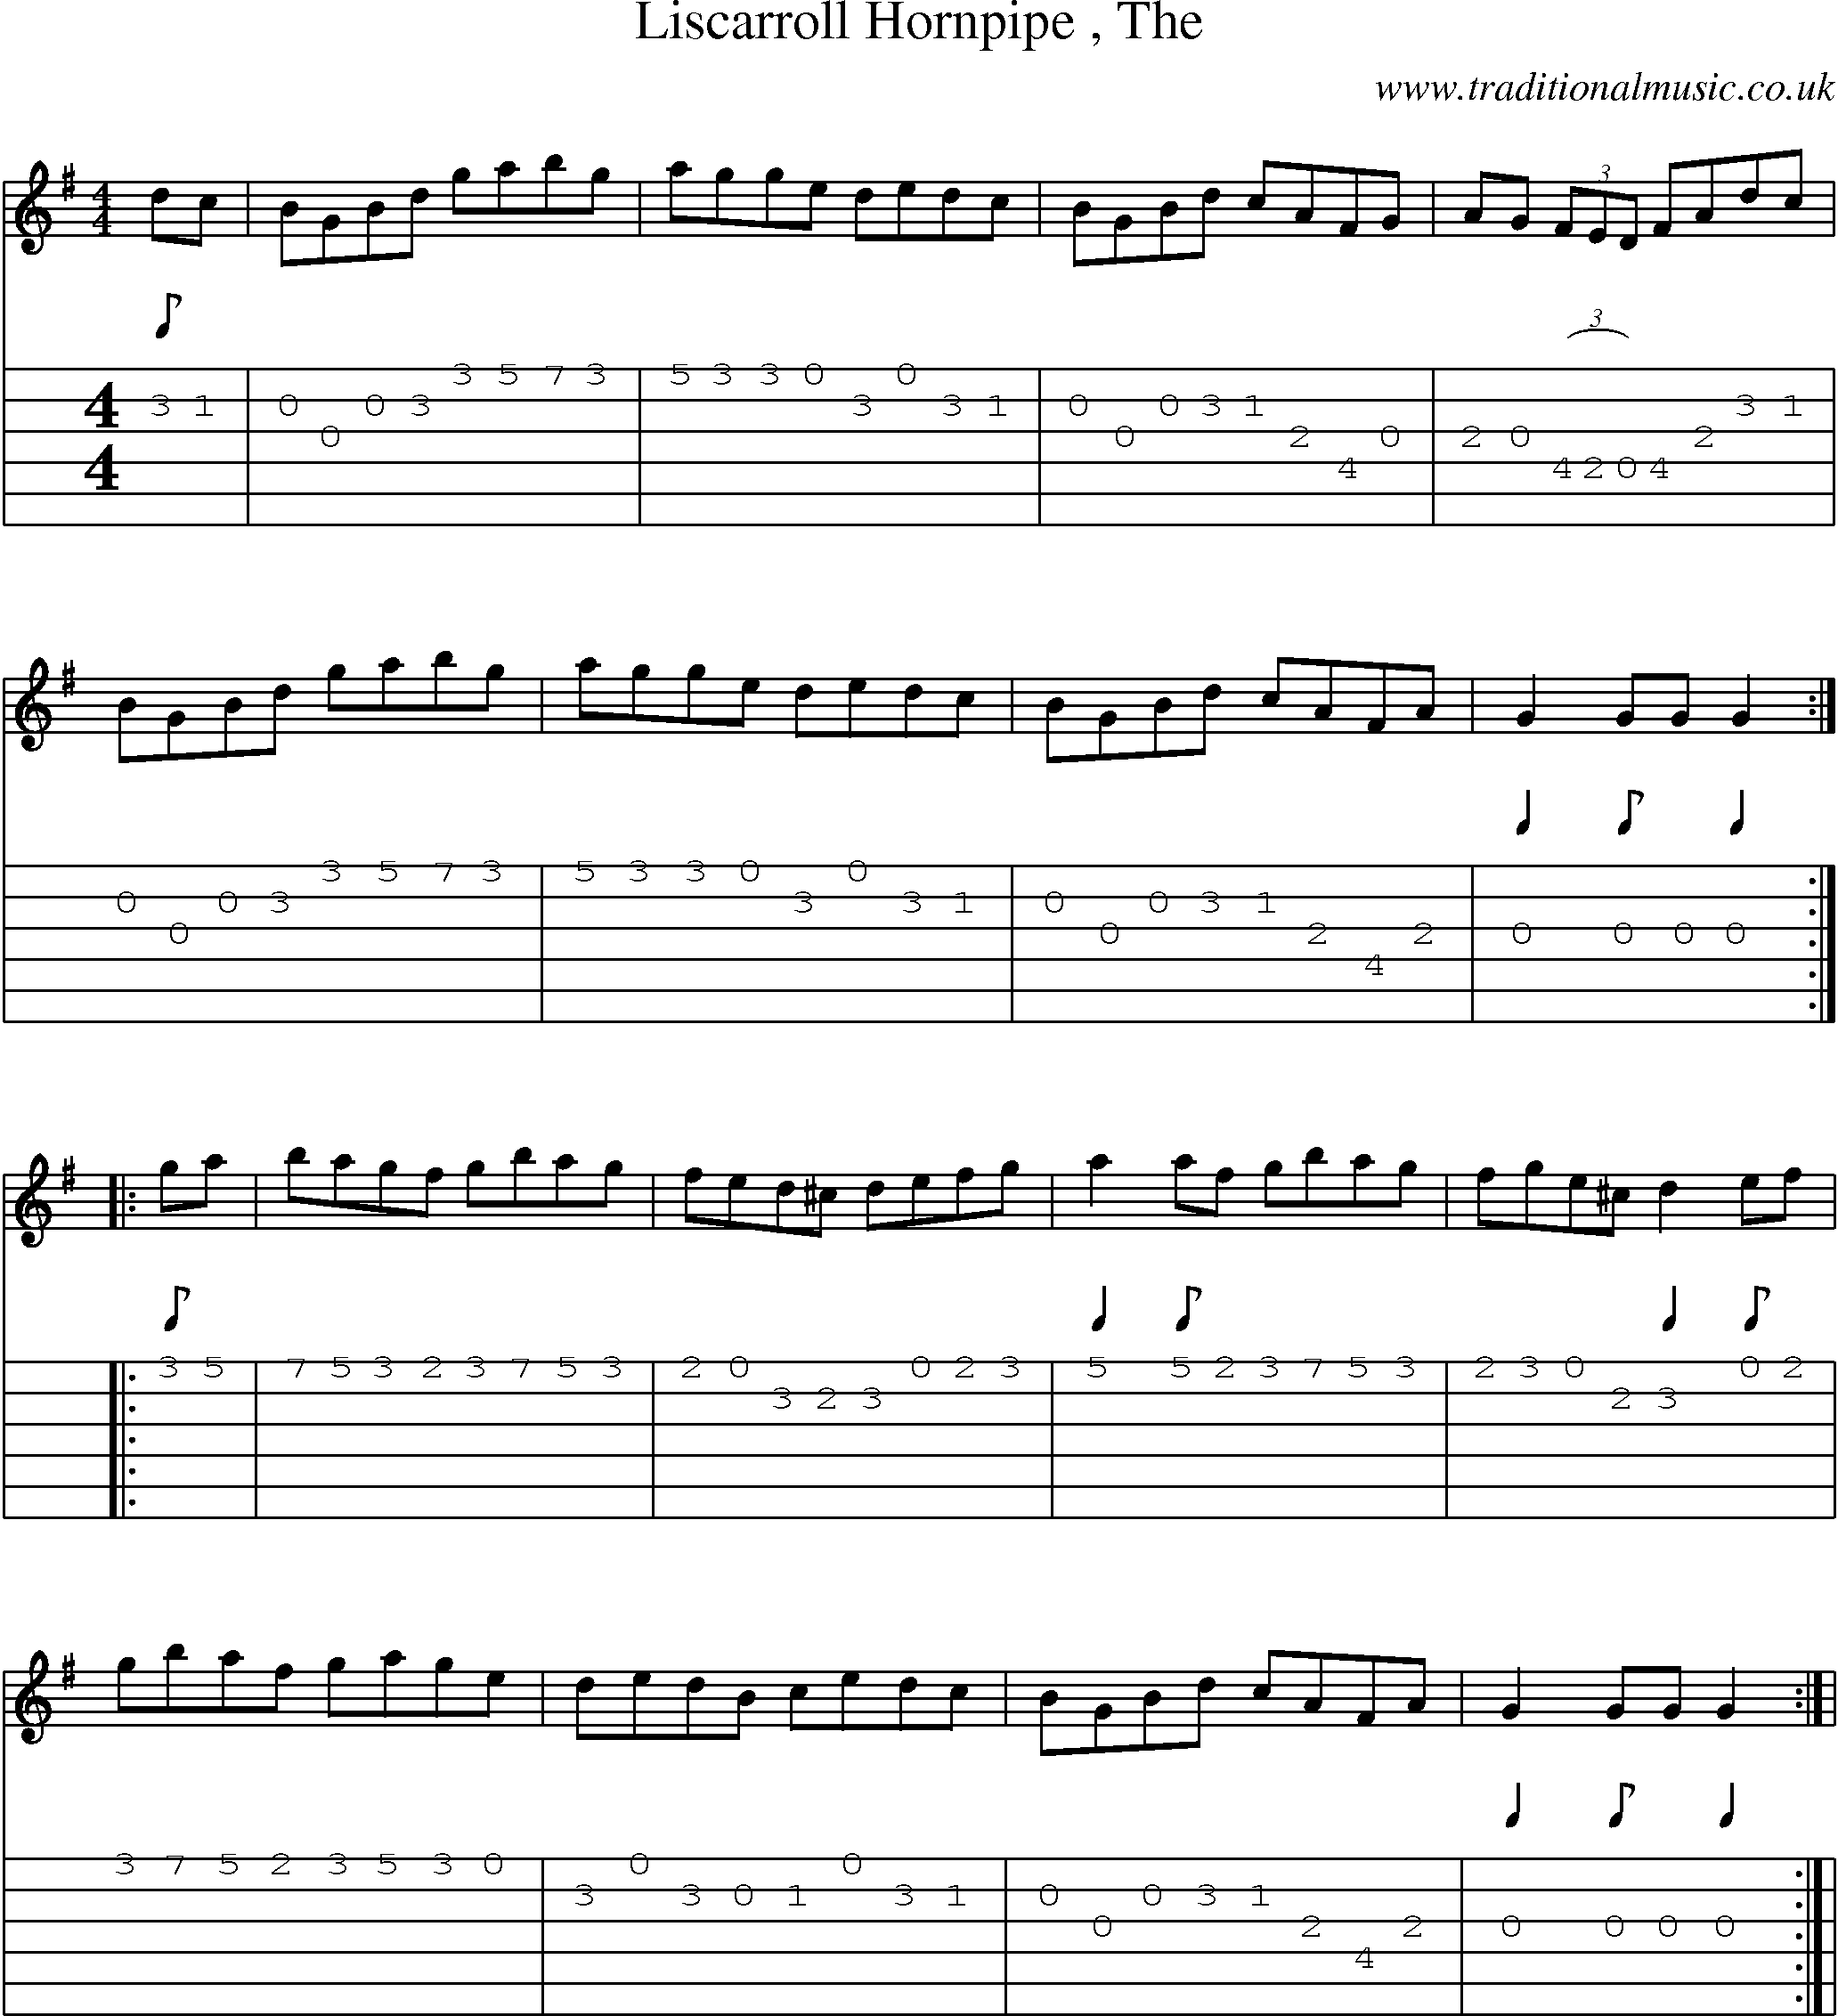 Music Score and Guitar Tabs for Liscarroll Hornpipe